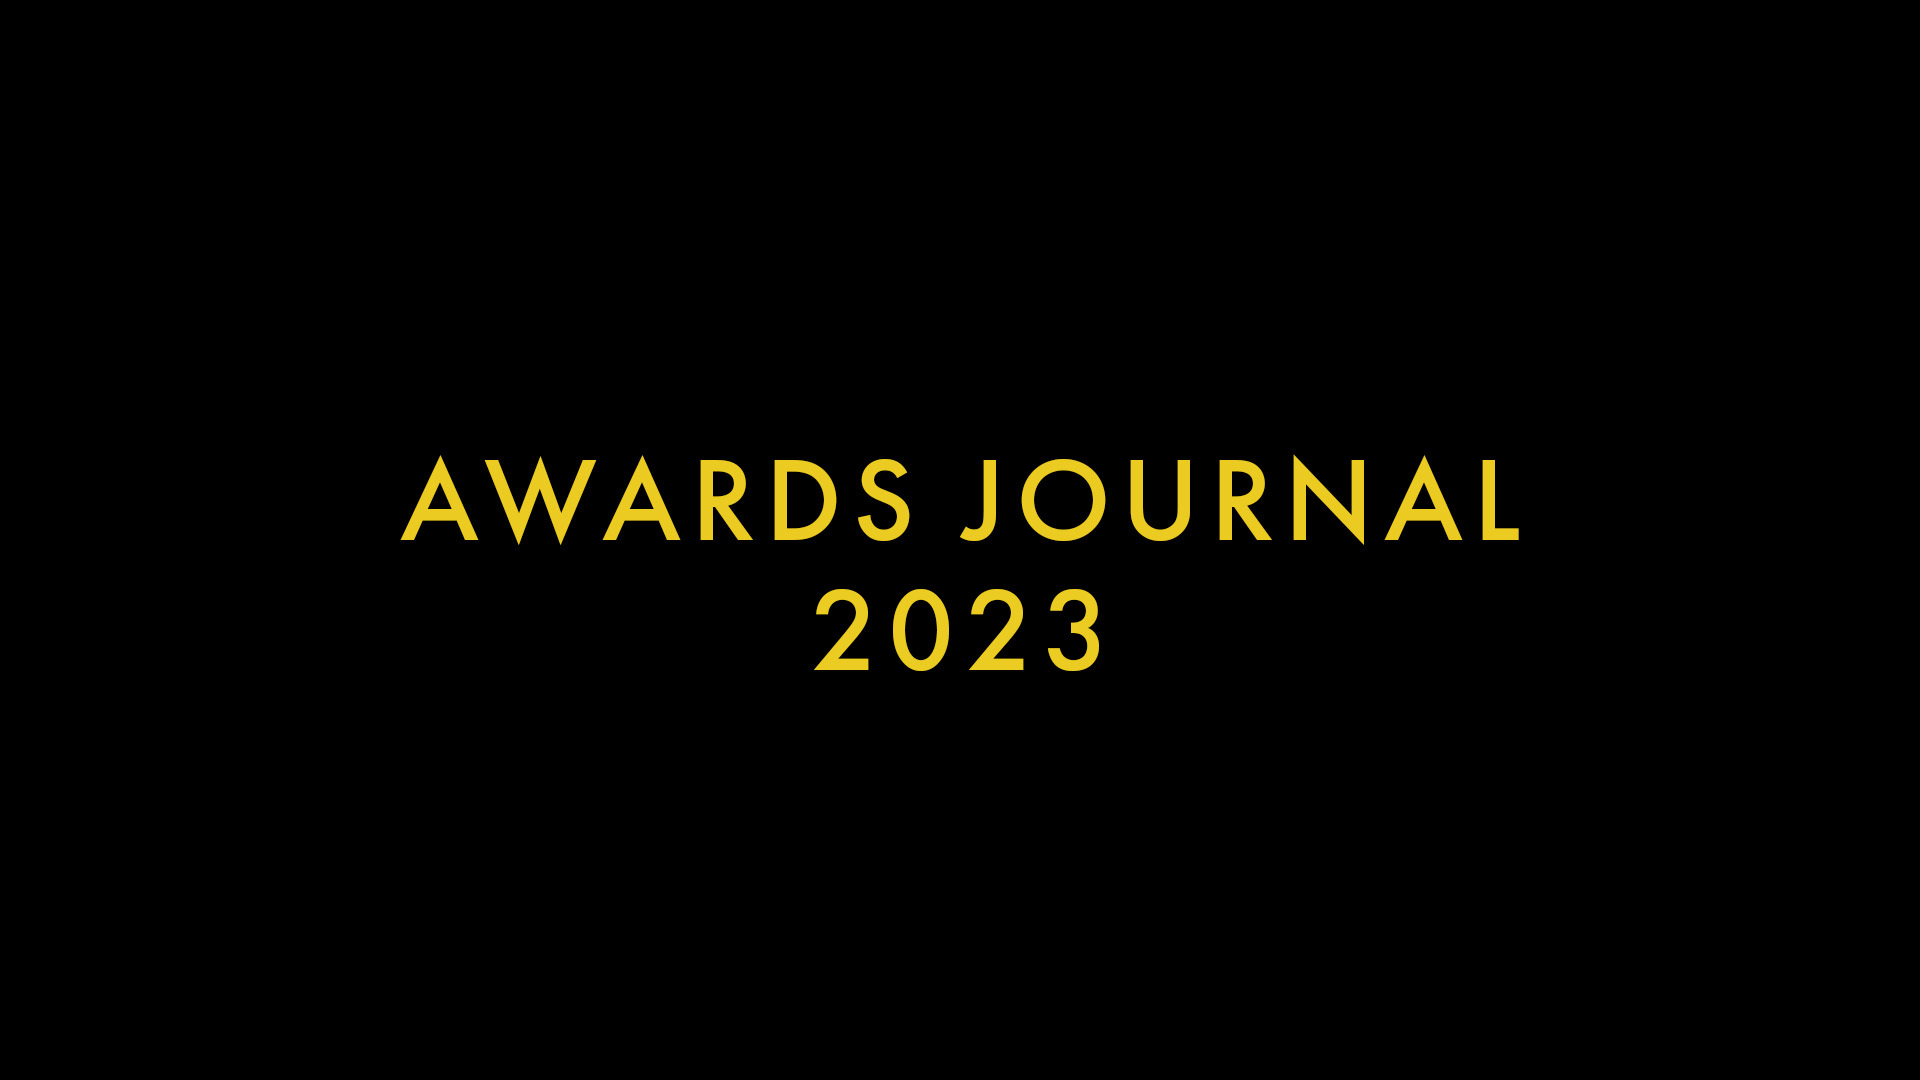 THE 2023 AWARDS JOURNAL IS COMING...